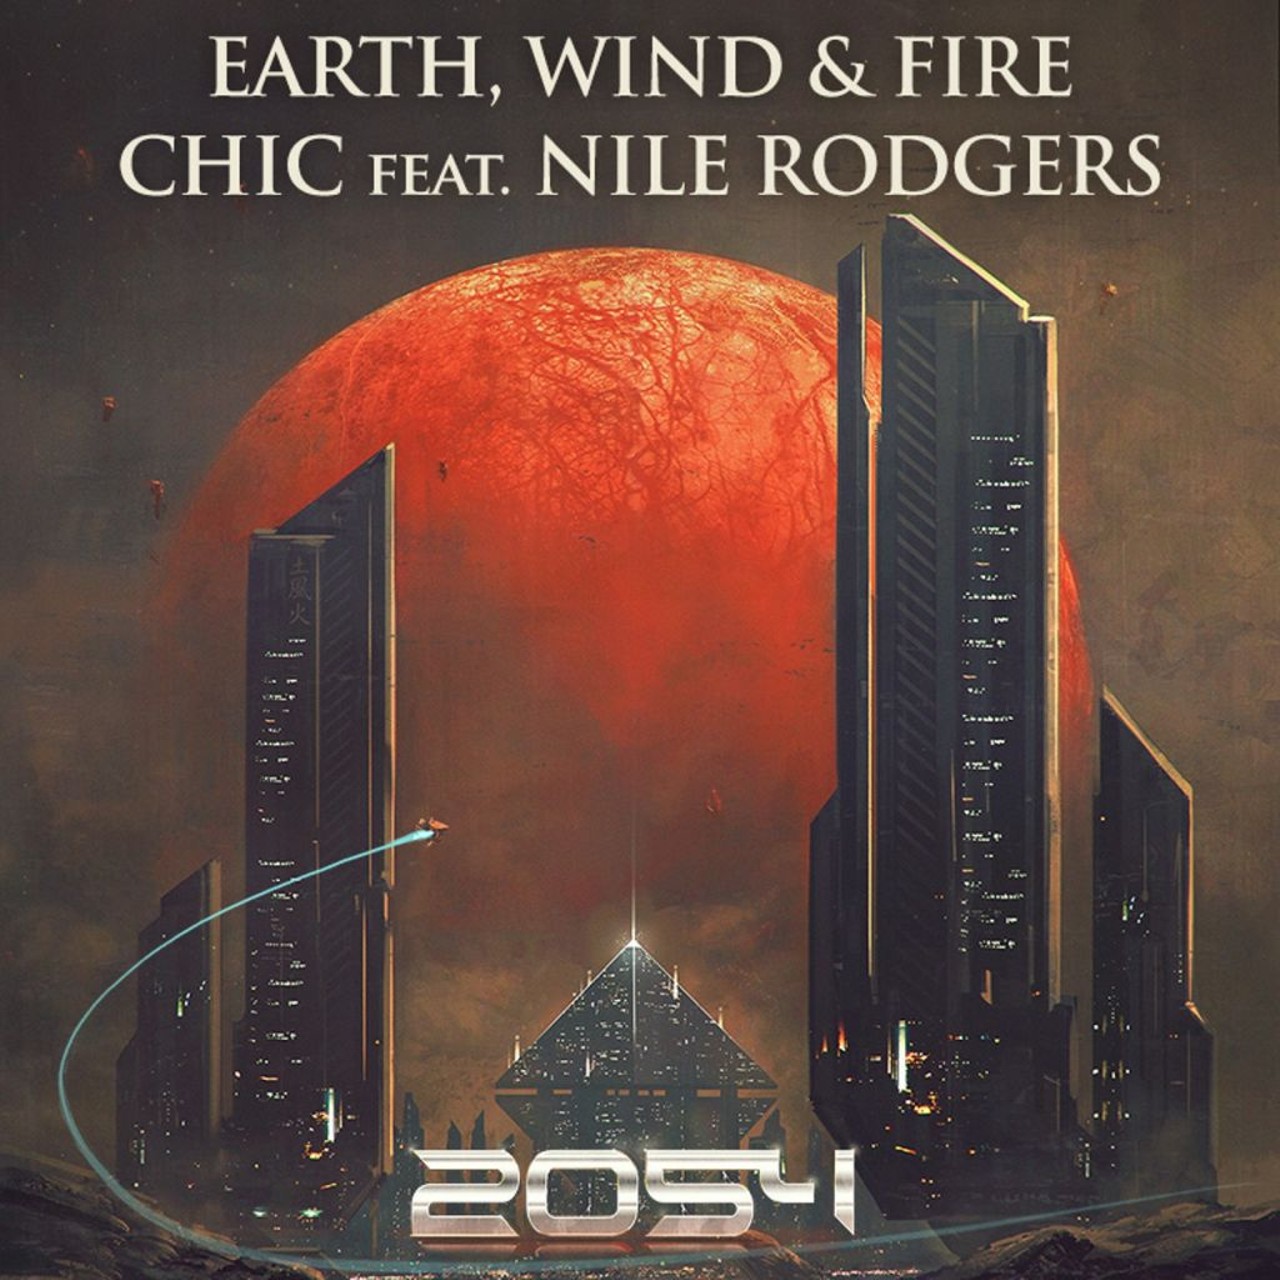 Earth, Wind & Fire 
Sat., July 22, 8 p.m., (210) 444-5140, AT&T Center, $39.50-$525